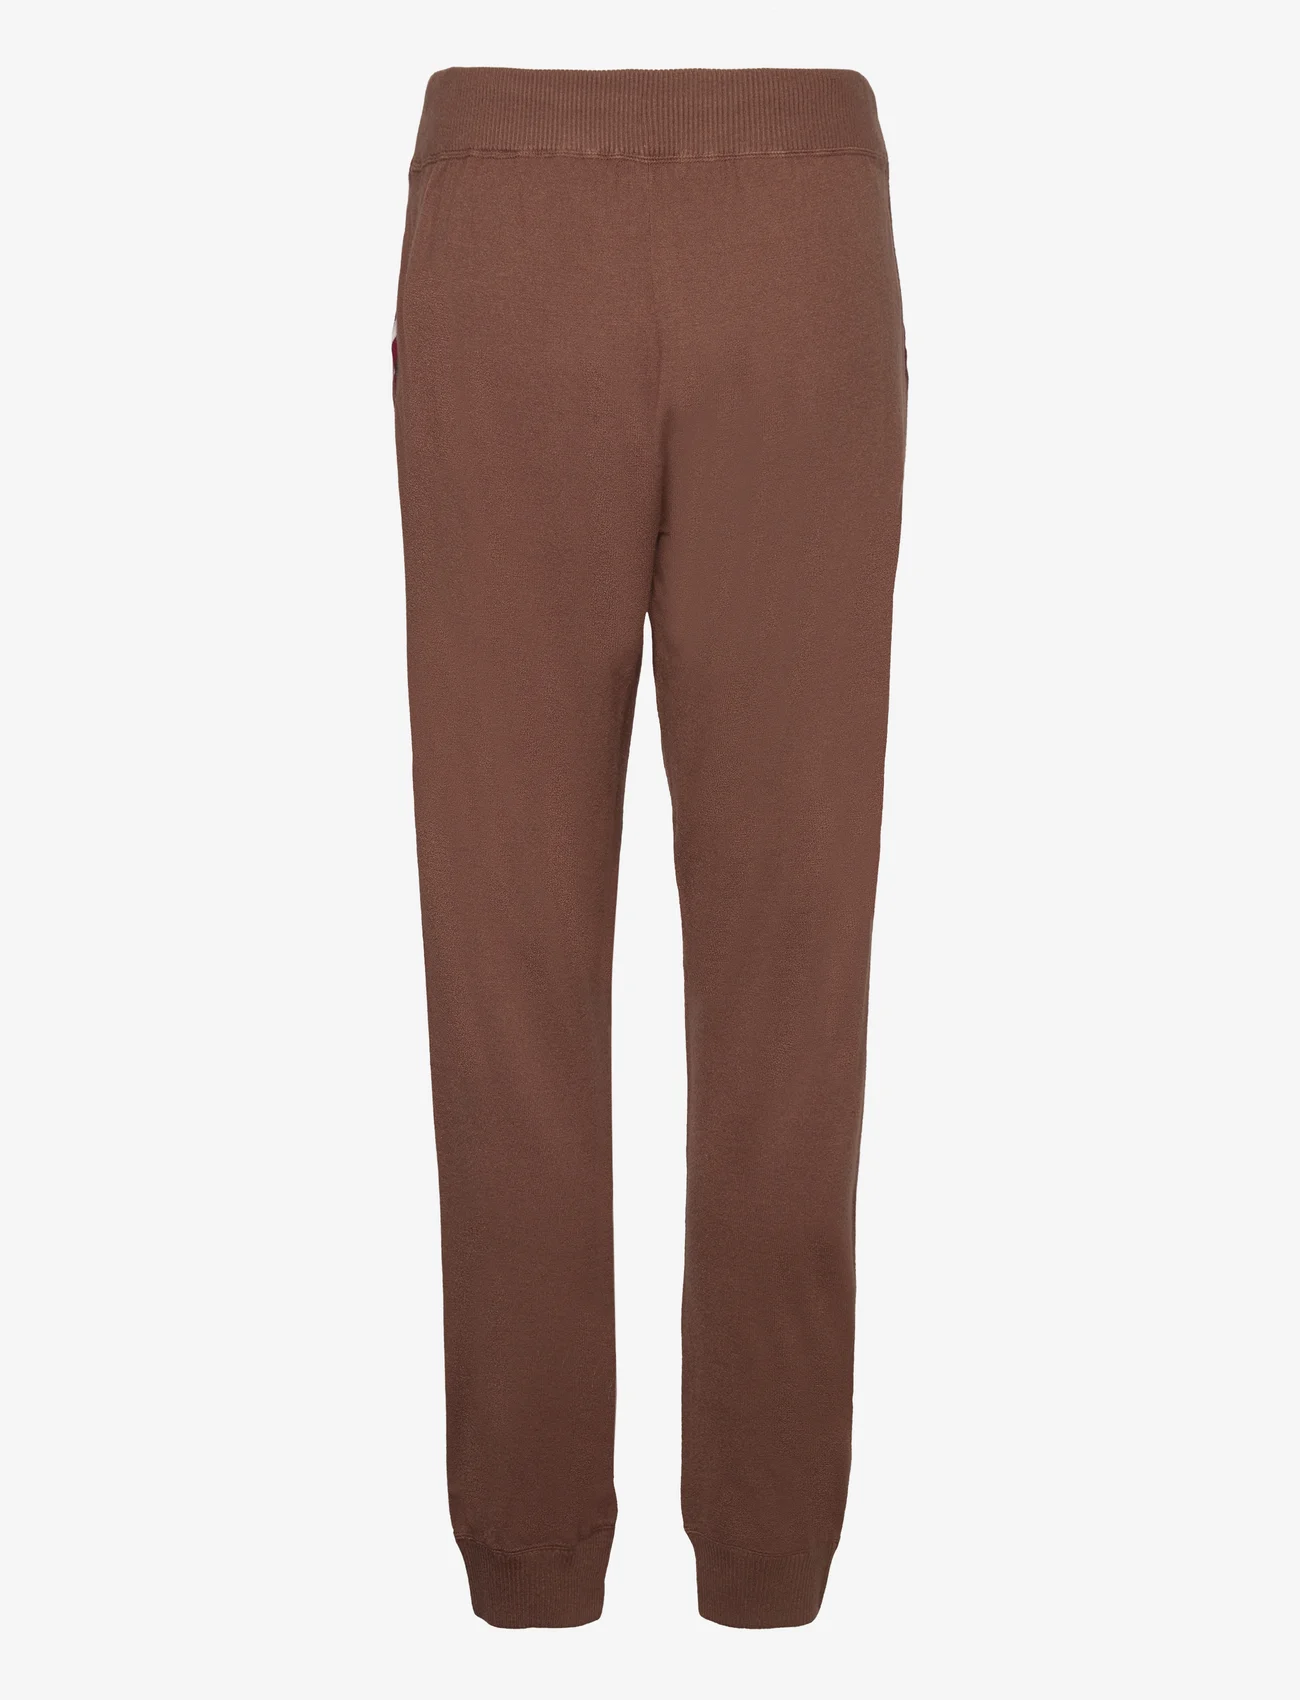 Tommy Hilfiger - CUFF PANTS C&S - joggers copy - cacao - 1